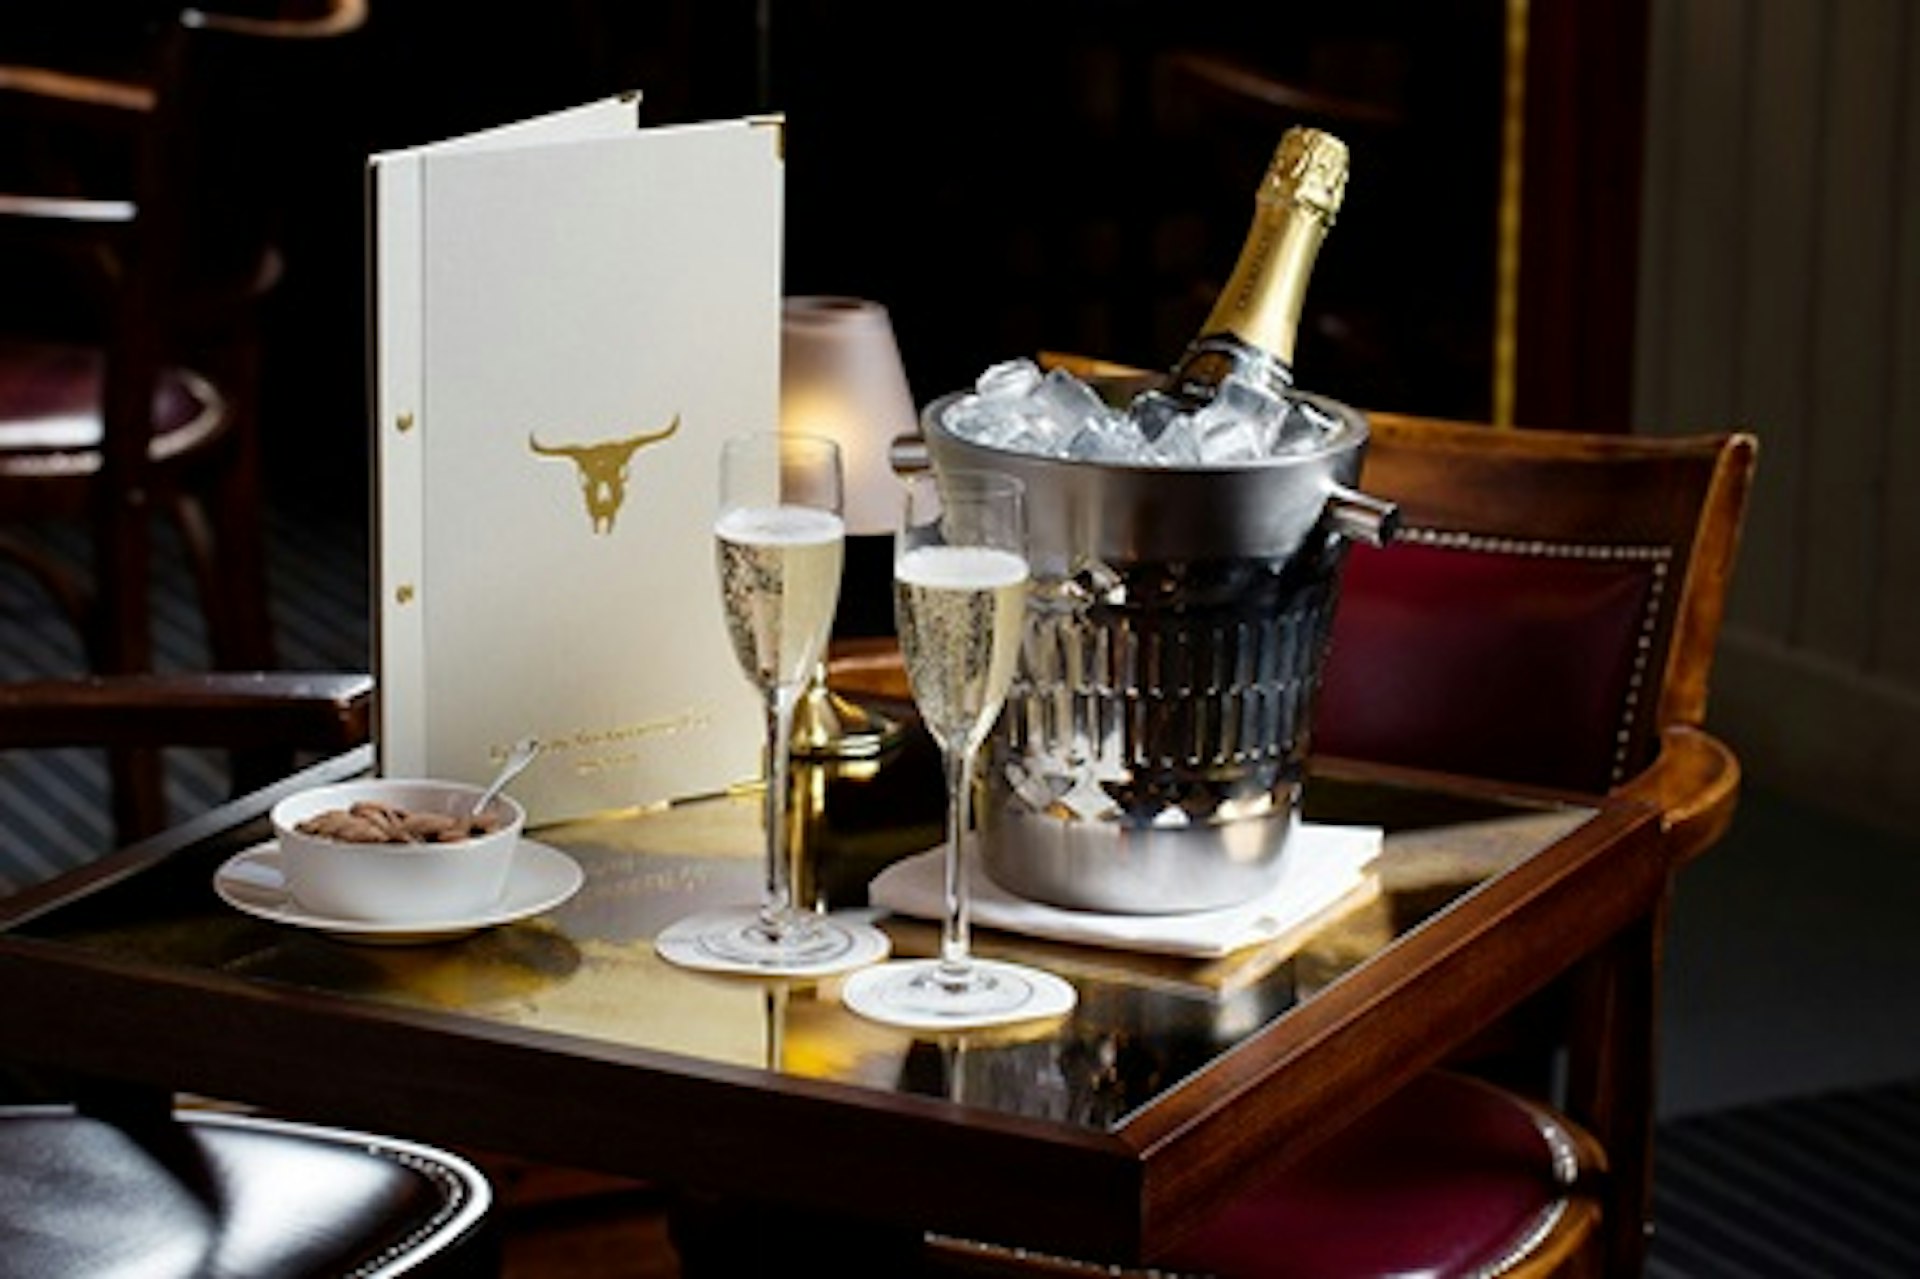 Three Course Champagne Celebration Dining with Sides for Two at Marco Pierre White's London Steakhouse Co 1